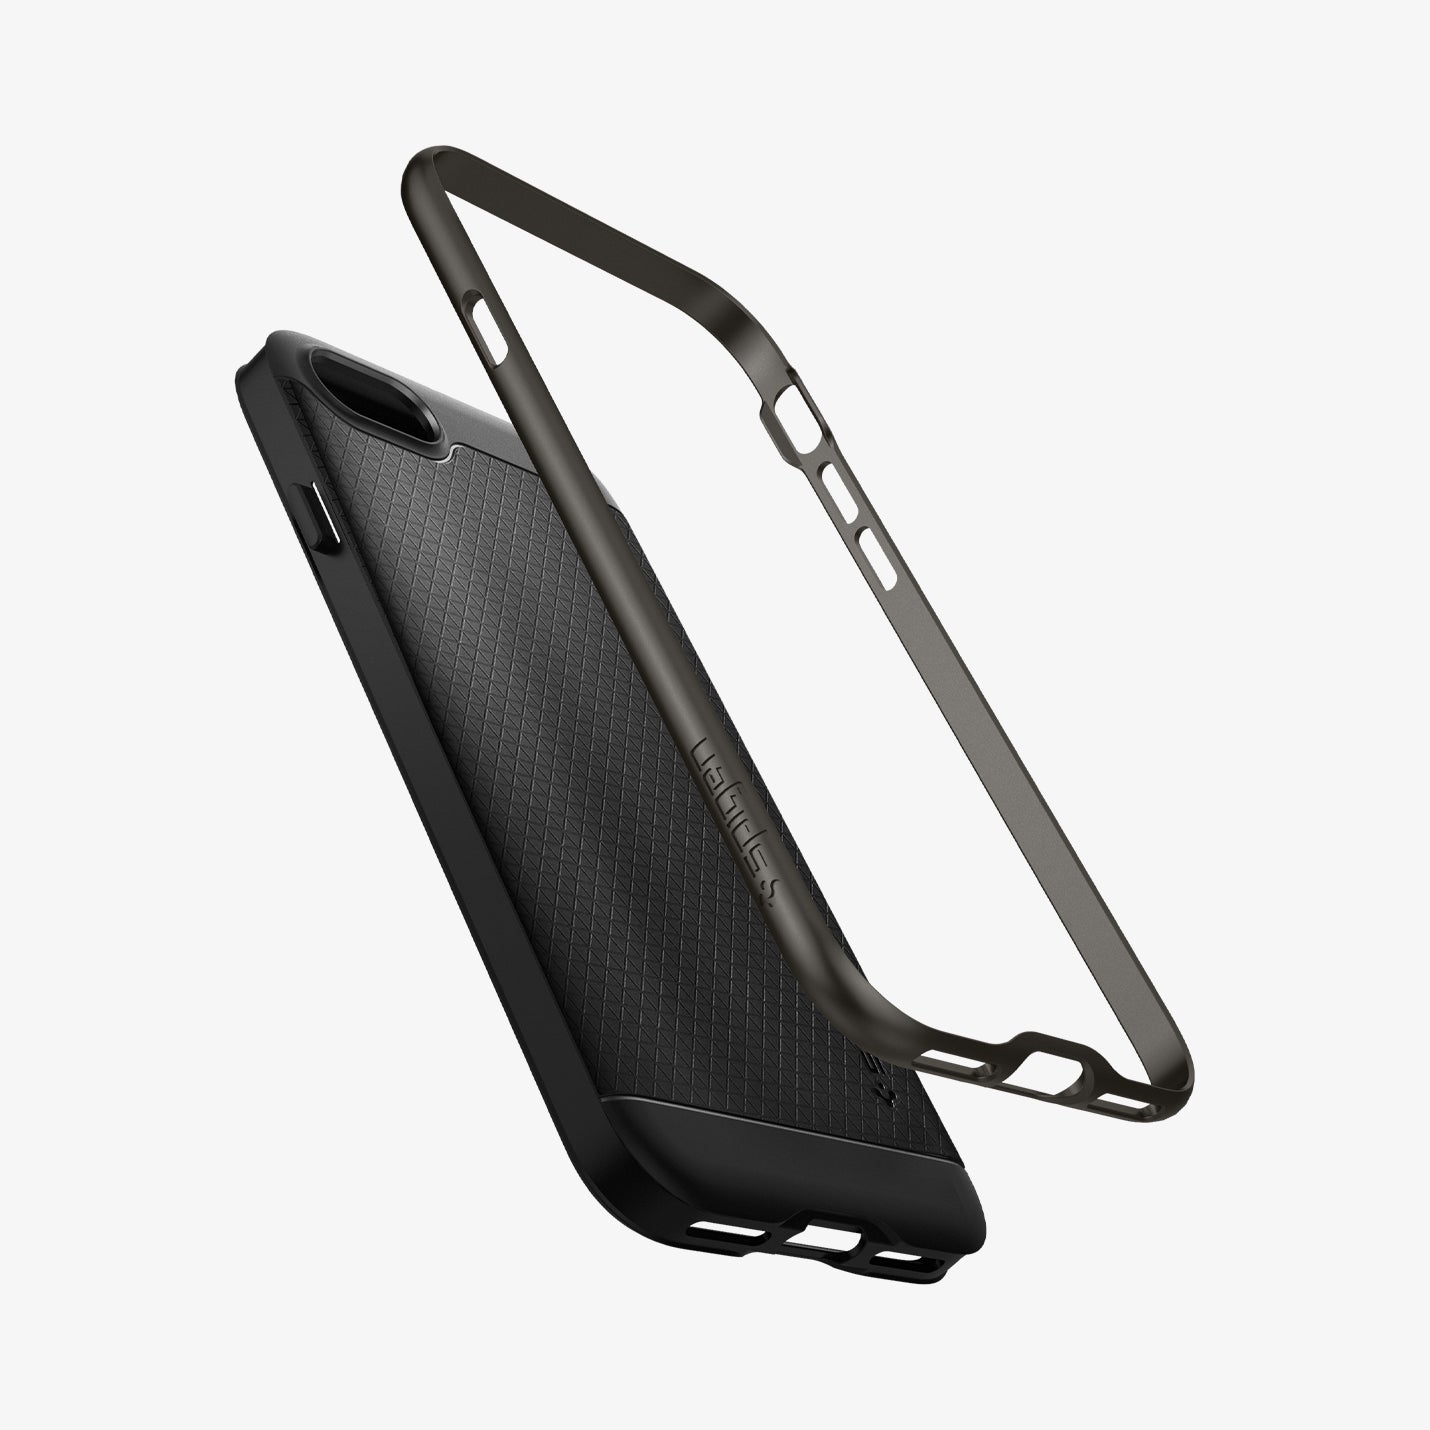 054CS22358 - iPhone SE Neo Hybrid case in gunmetal showing the back and frame